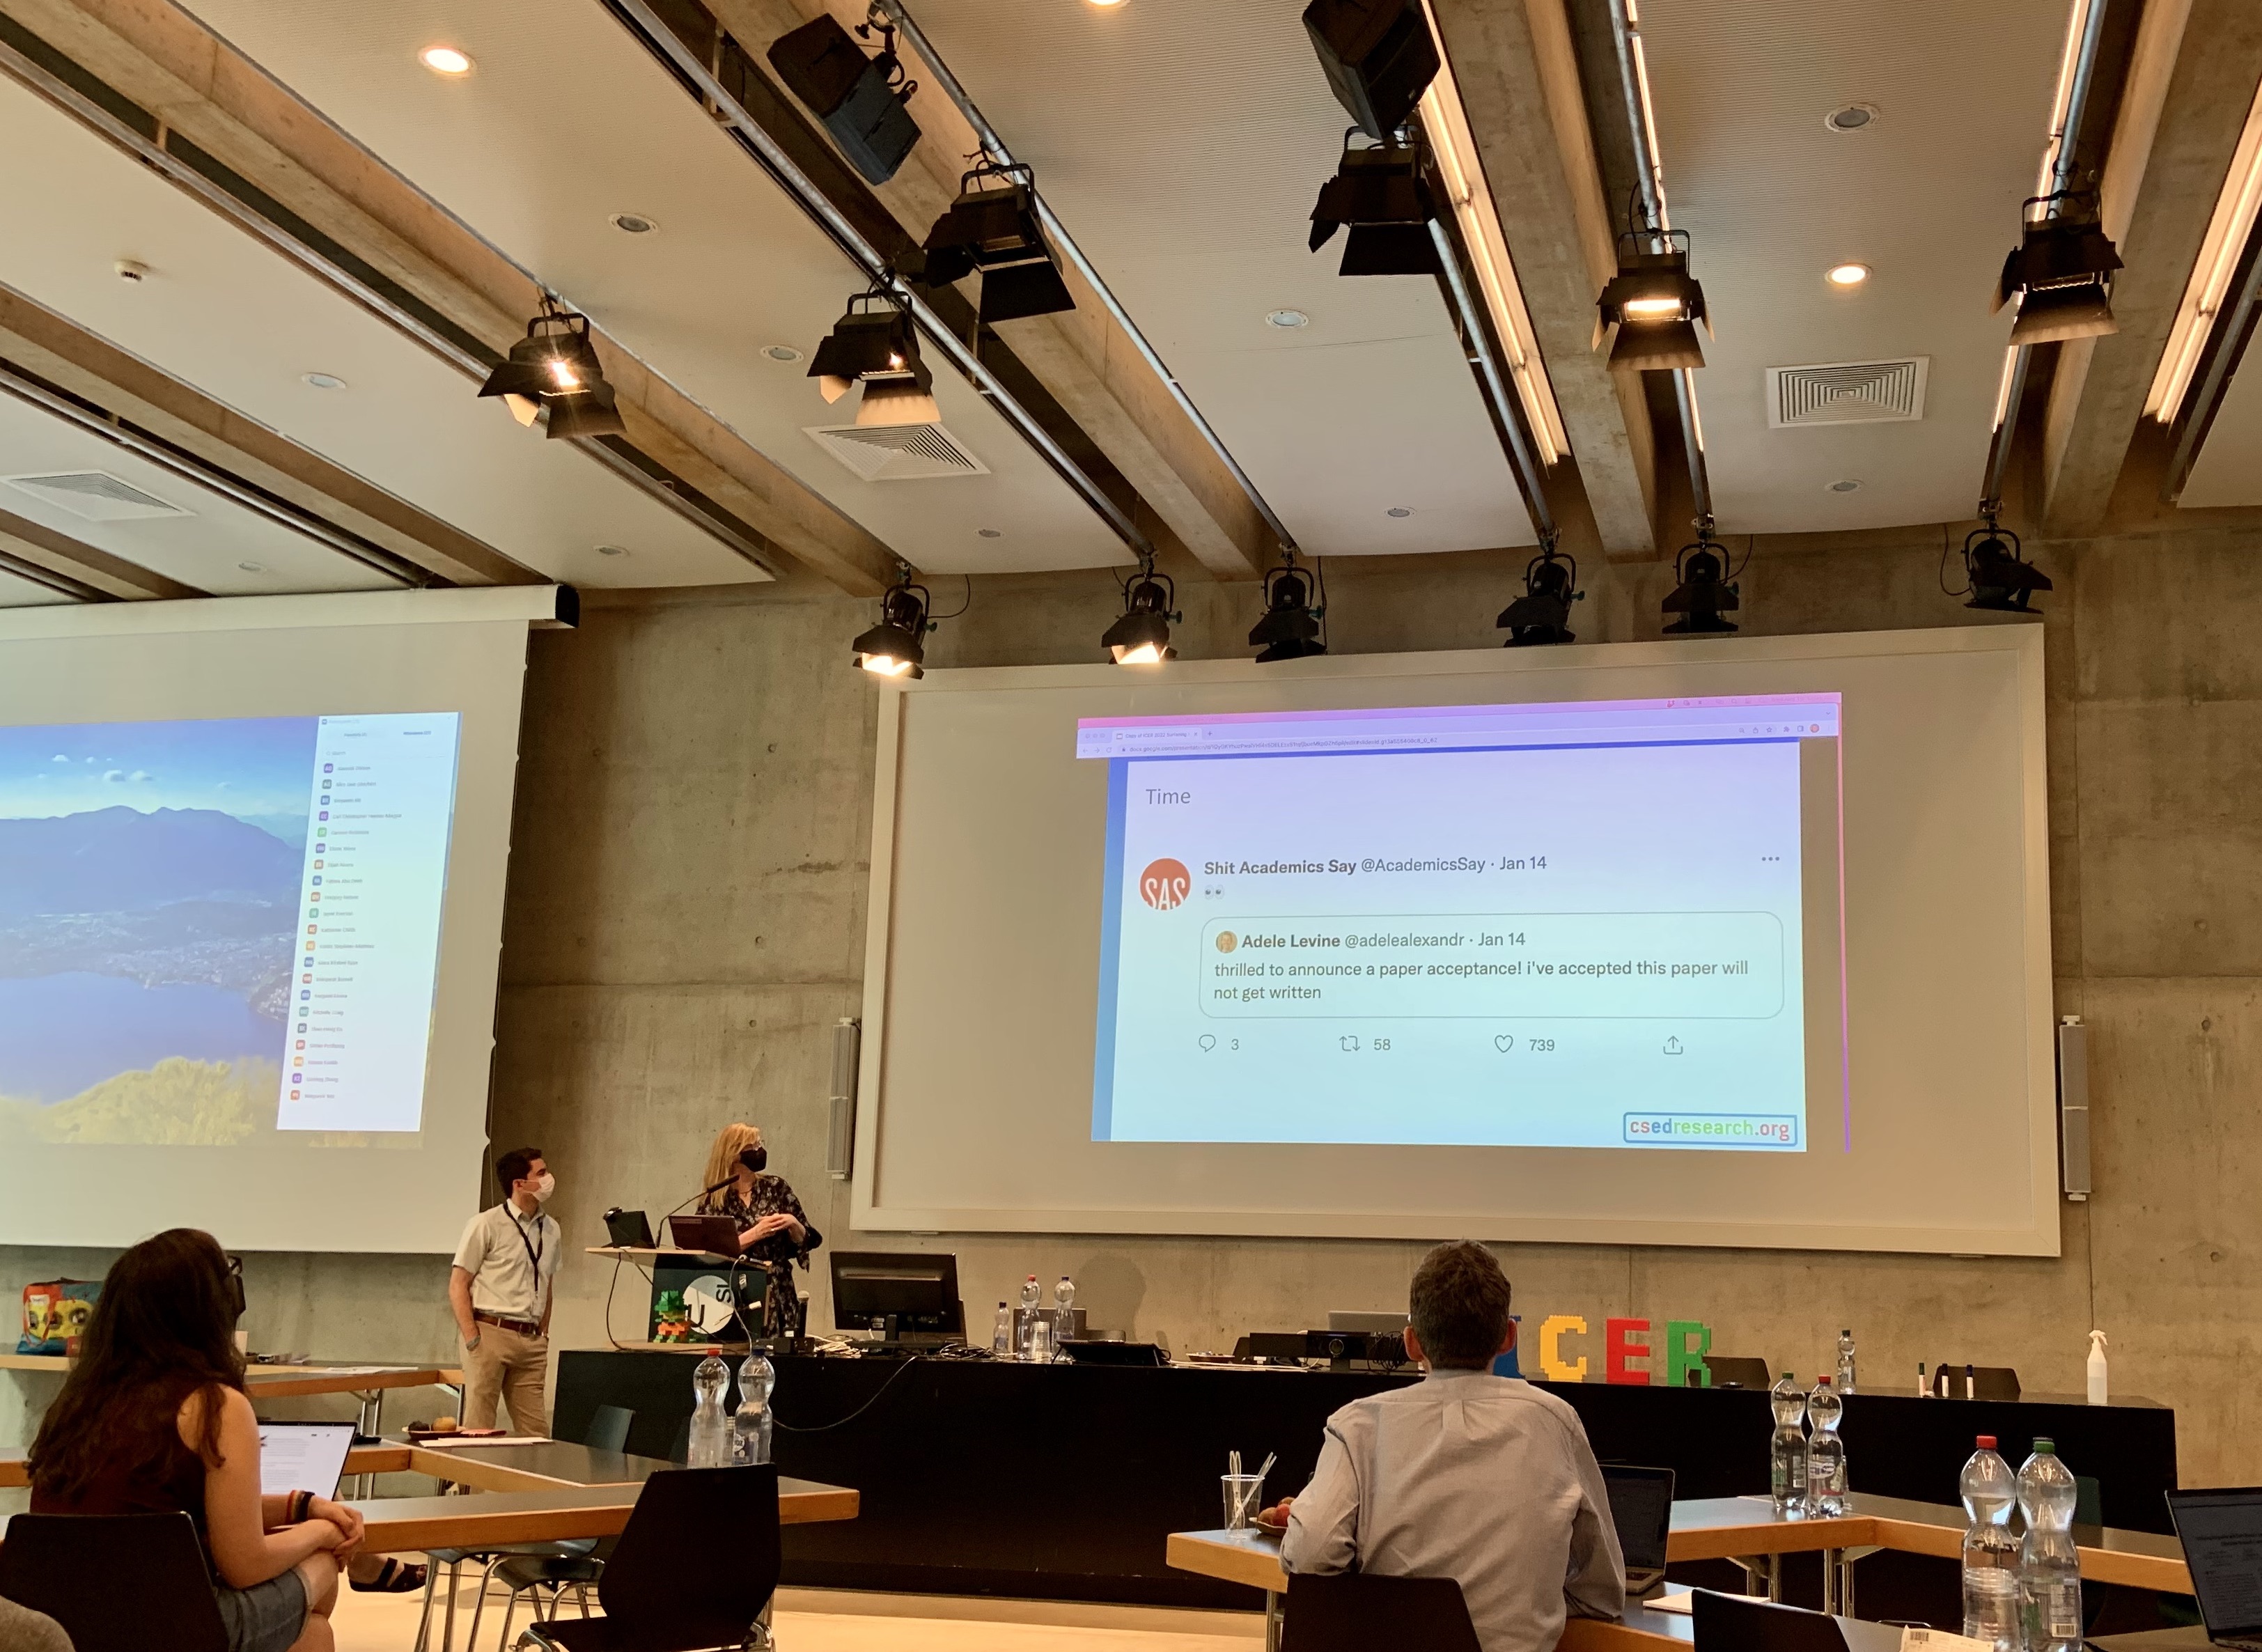 Monica McGill on the ICER stage showing a slide containing the tweet: 'Thrilled to announce a paper acceptance! I have accepted this paper will not get written.'